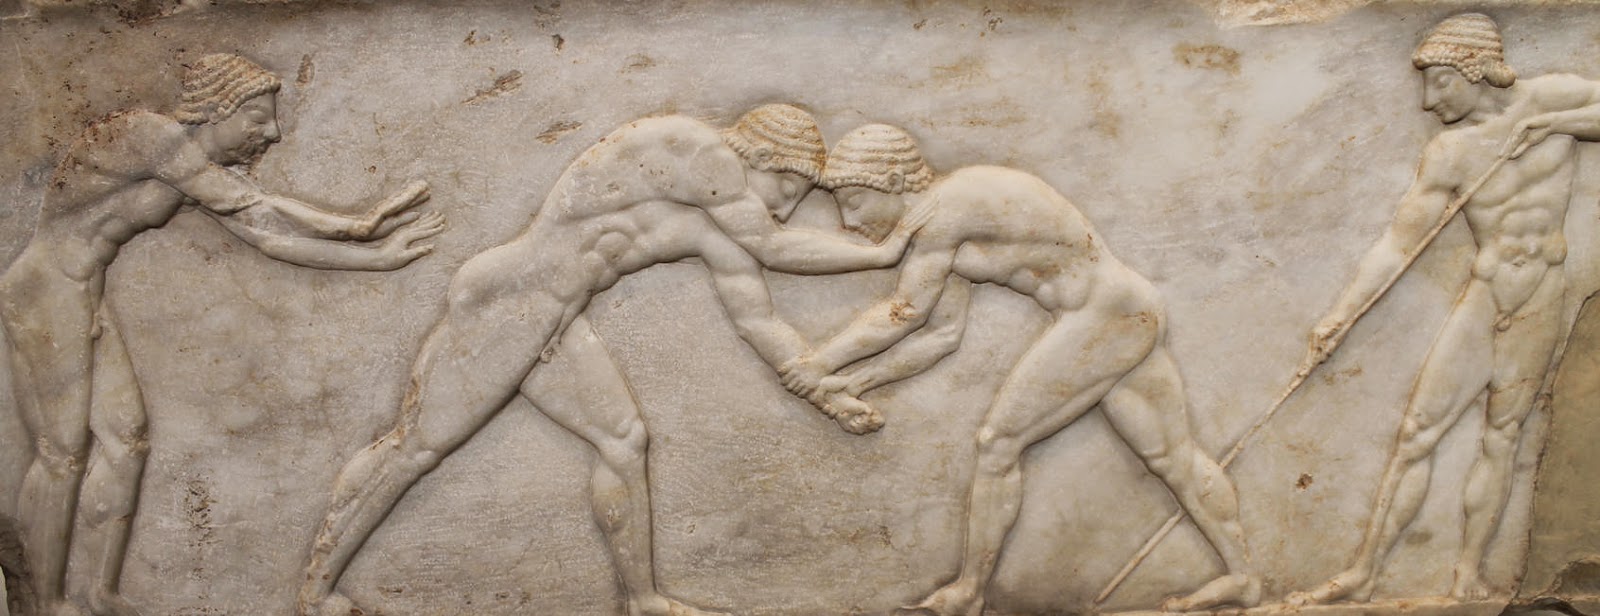 ancient wrestling AthensMuseum